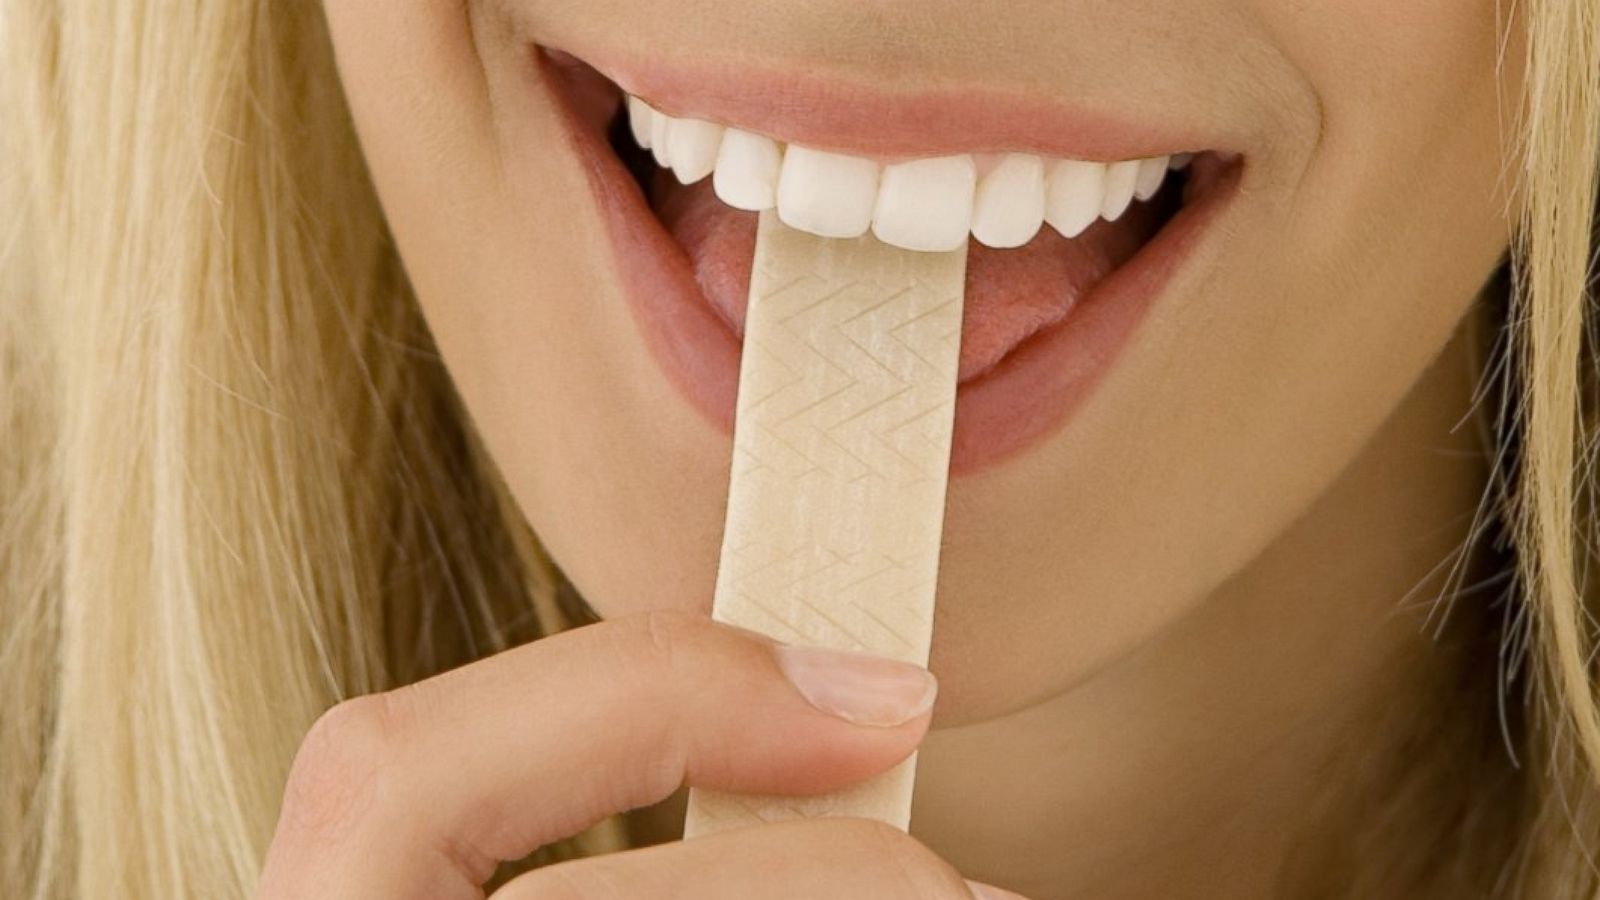 Chewing gum: Is it bad for you?